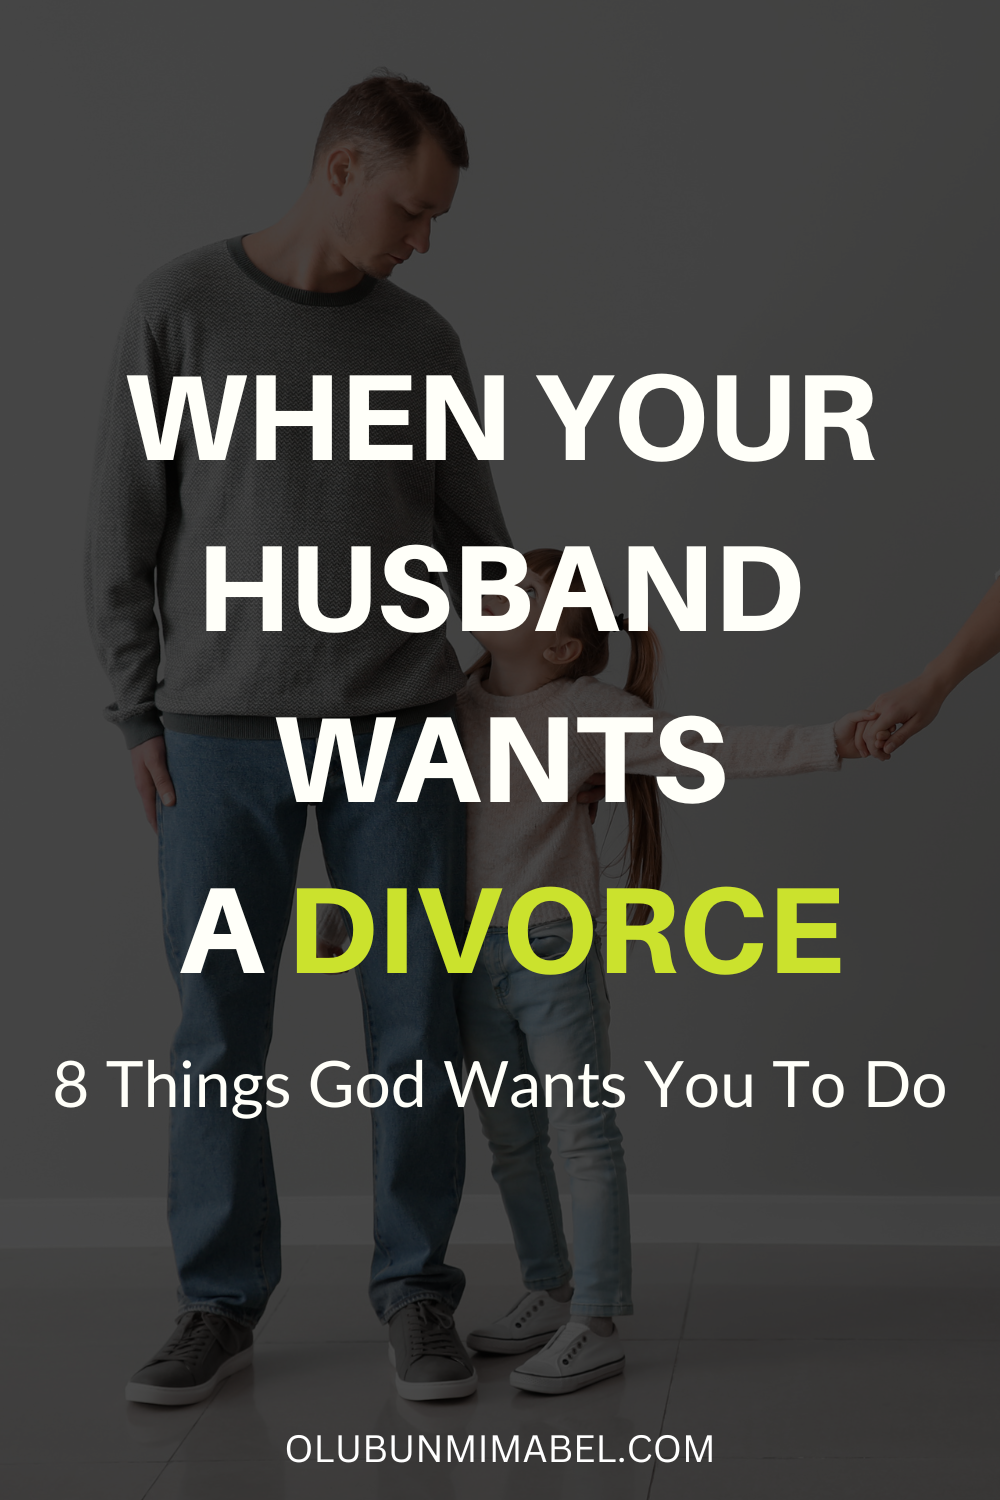 What Does God Want Me To Do When My Husband Wants A Divorce?